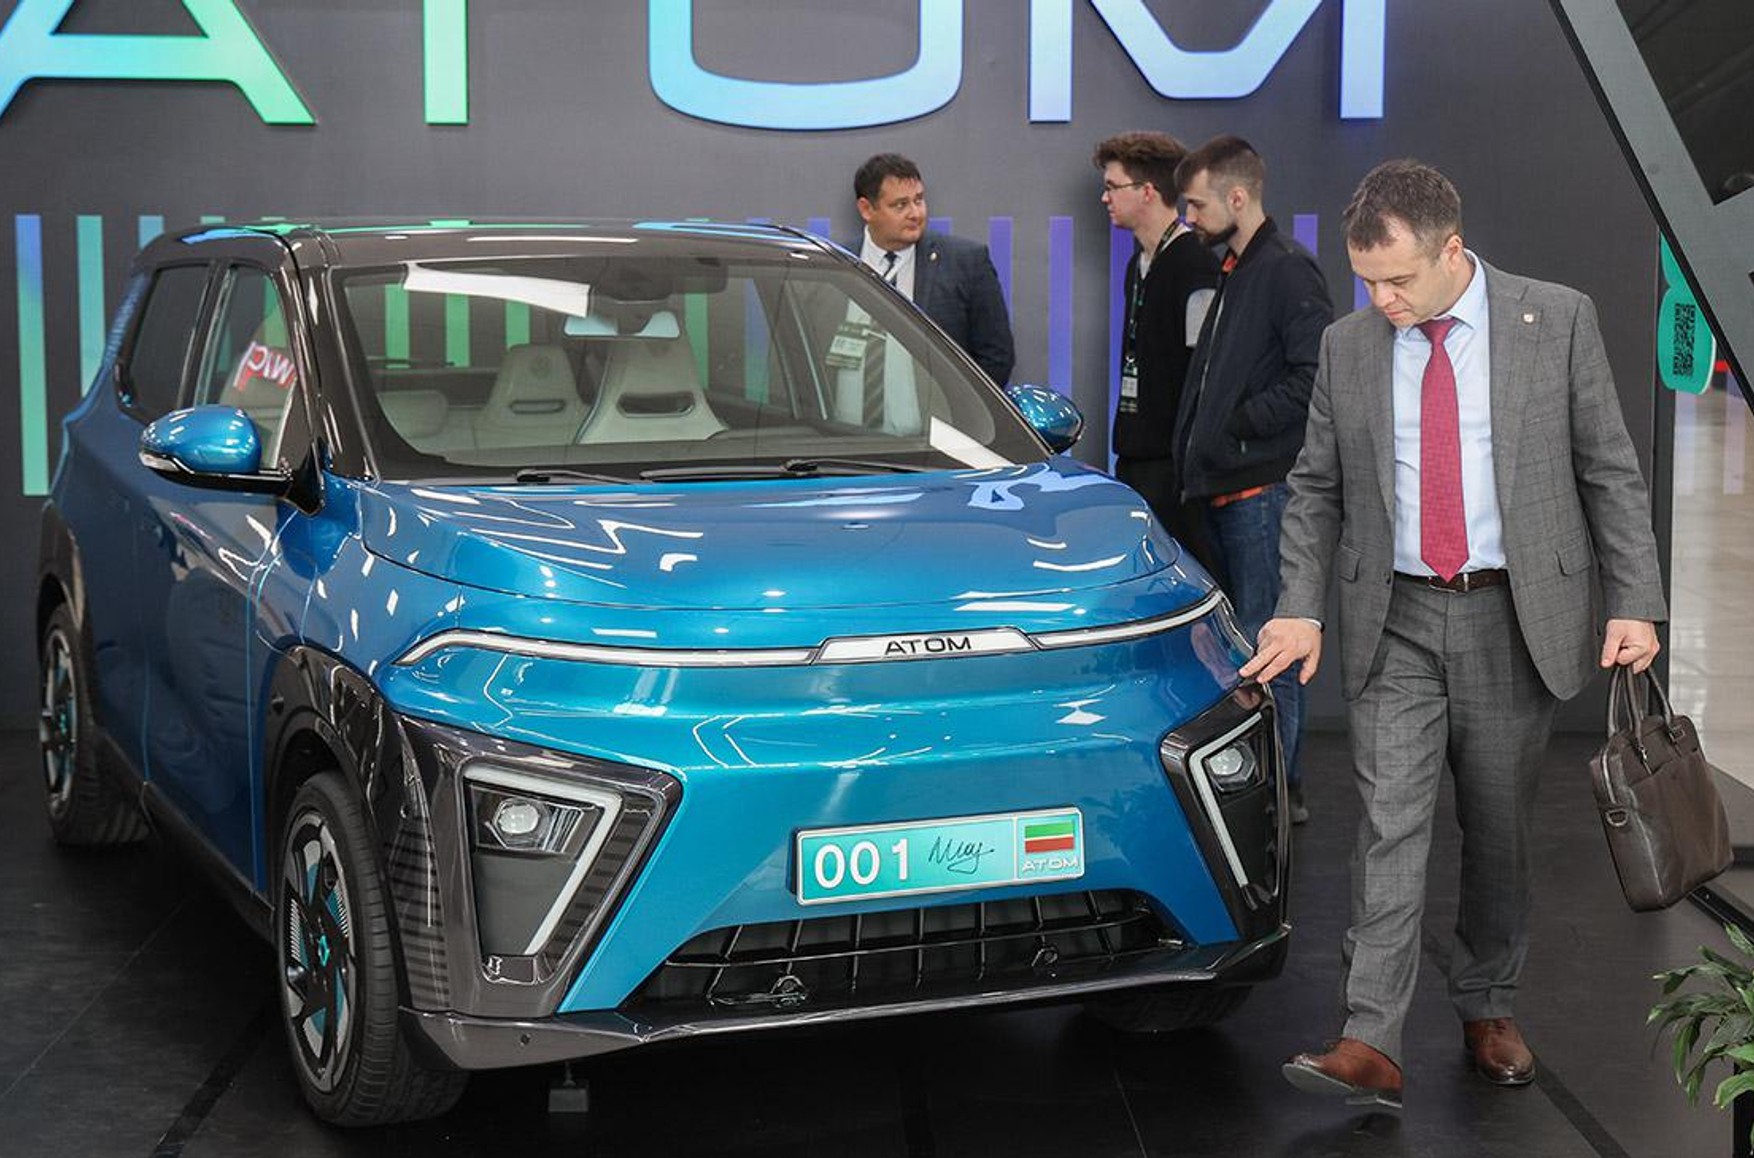 The Russian Atom electric car has received 36 thousand pre orders The Russian Atom electric car has received 36 thousand pre-orders. According to an auto expert, Russians will not be able to afford such a car.